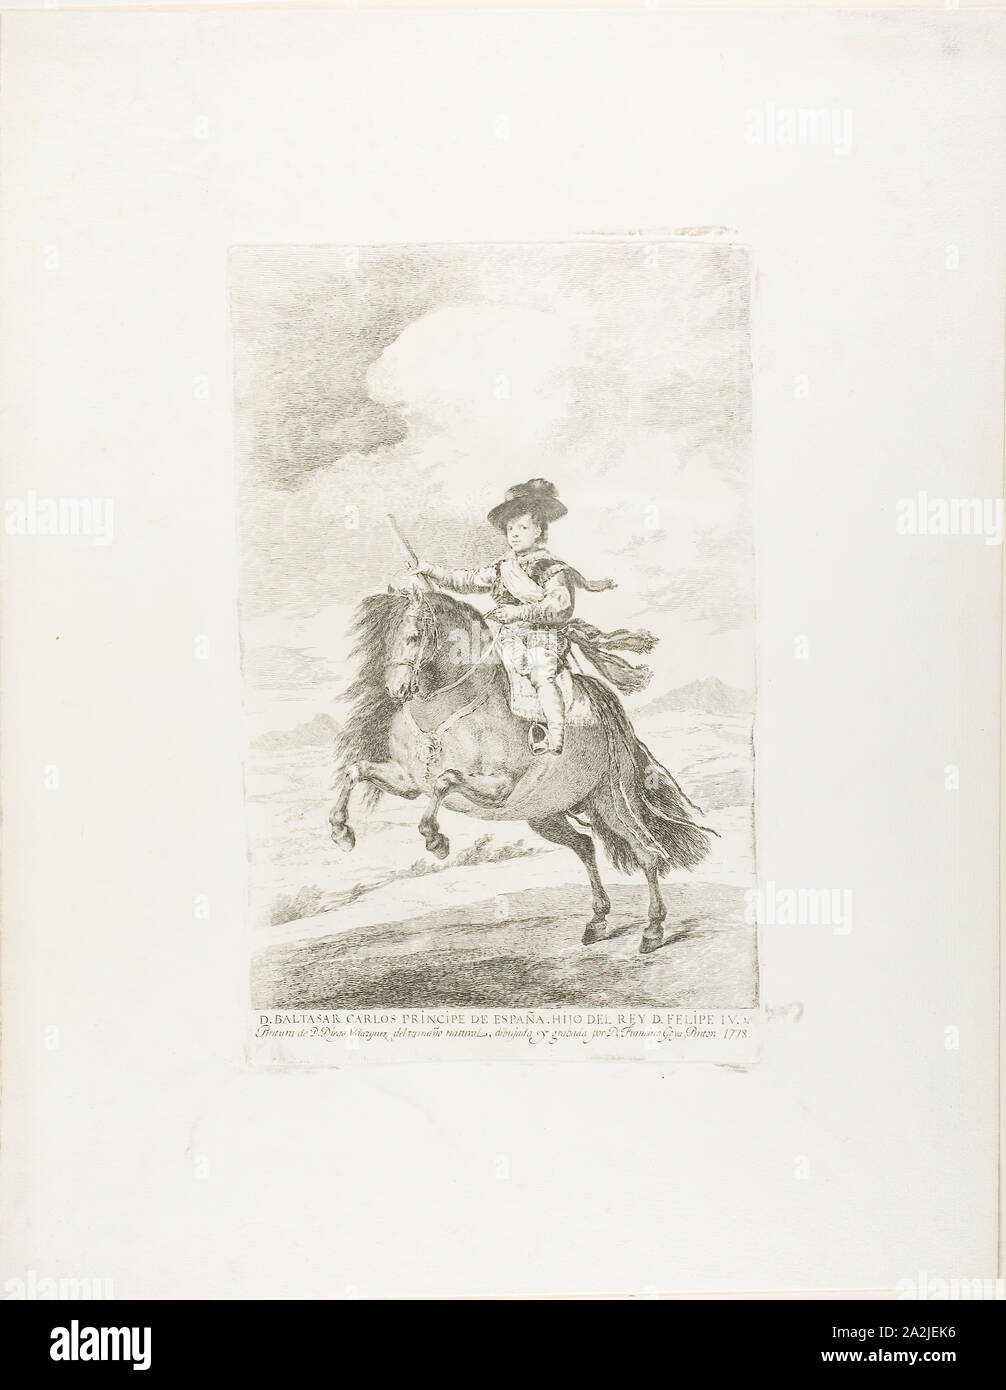 Baltasar Carlos, 1778, Francisco José de Goya y Lucientes (Spanish, 1746-1828), after Diego Velázquez (Spanish, 1599-1660), Spain, Etching and drypoint with engraved inscription on ivory laid paper, 326 x 223 mm (image), 350 x 223 mm (plate), 553 x 431 mm (sheet, folded at bottom Stock Photo